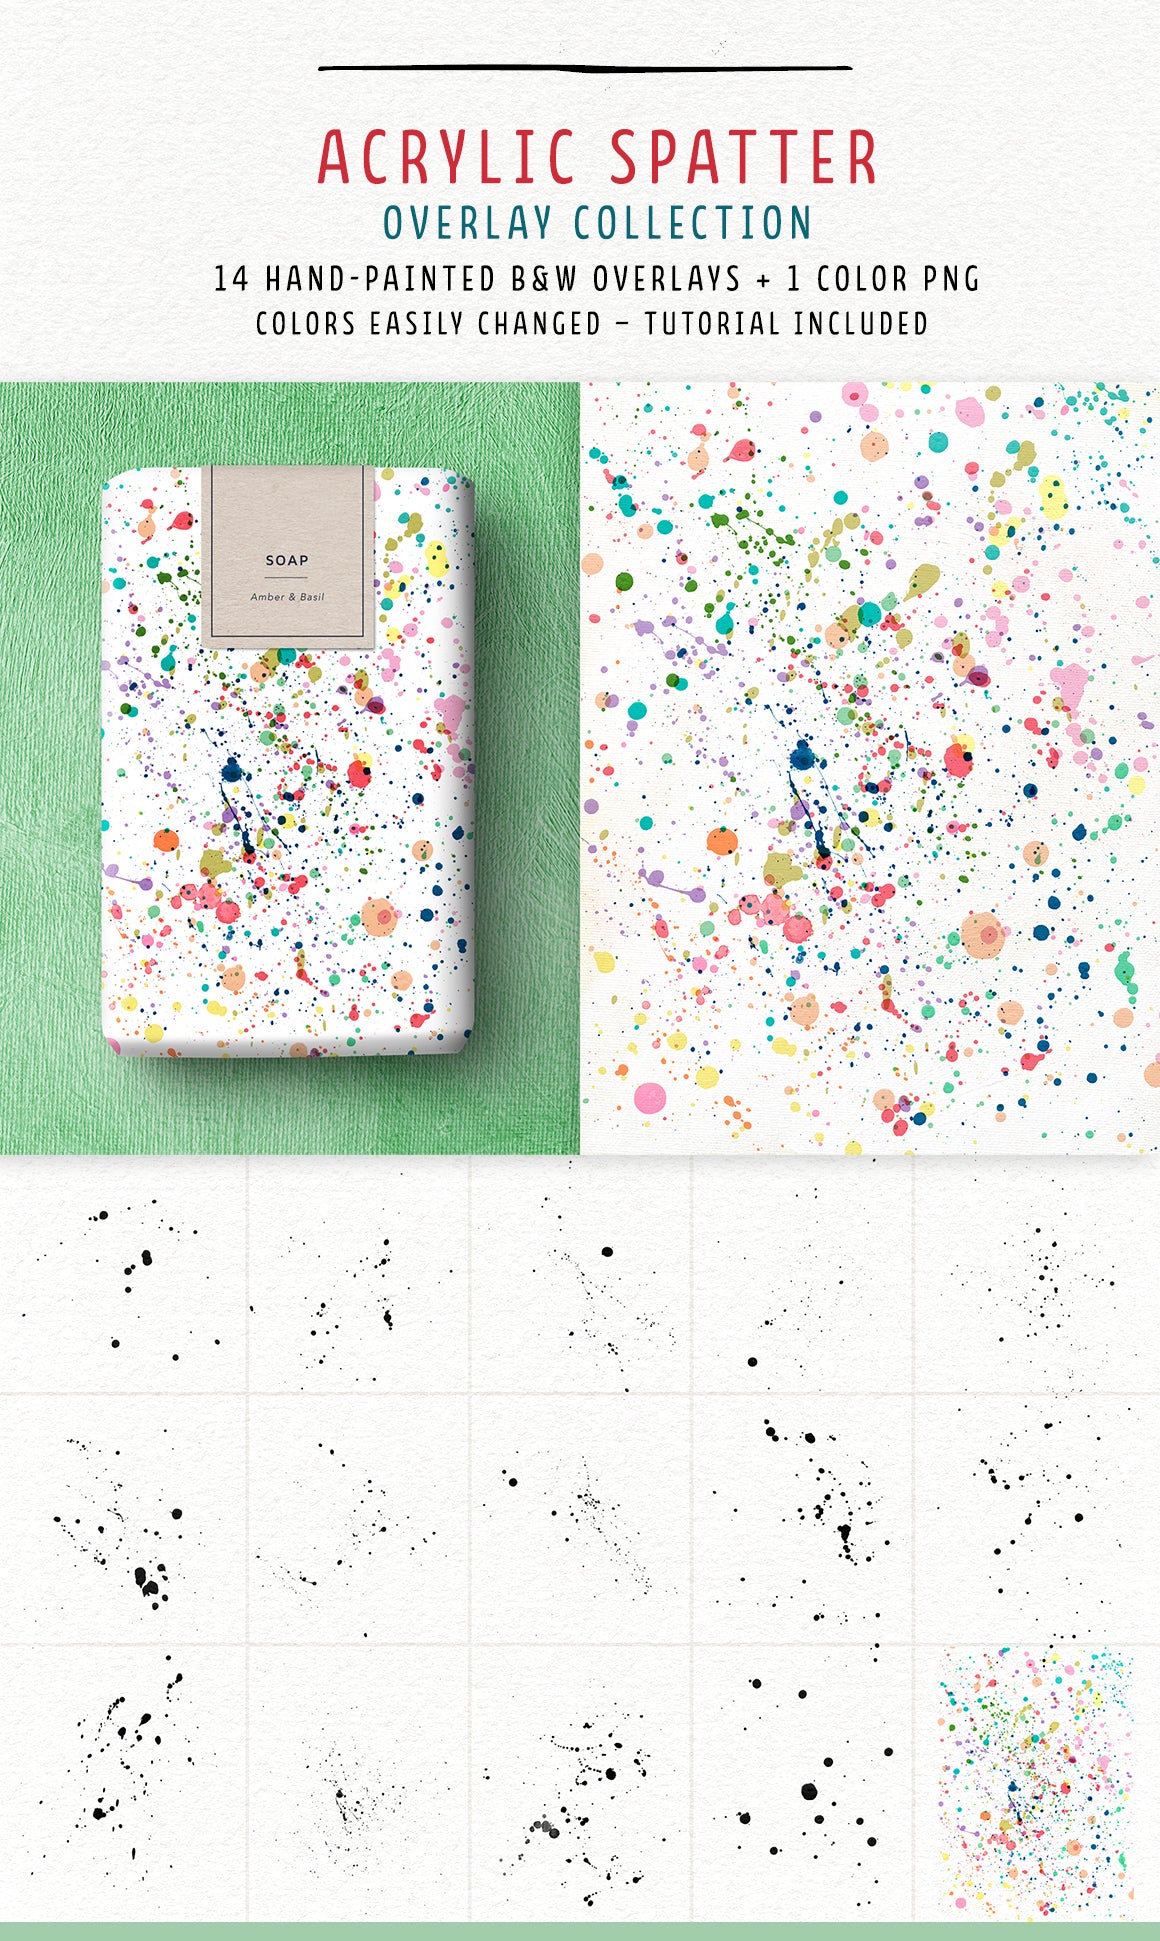 Acrylic spatter overlays from the Complete Inspirational Textures and Elements Collection.